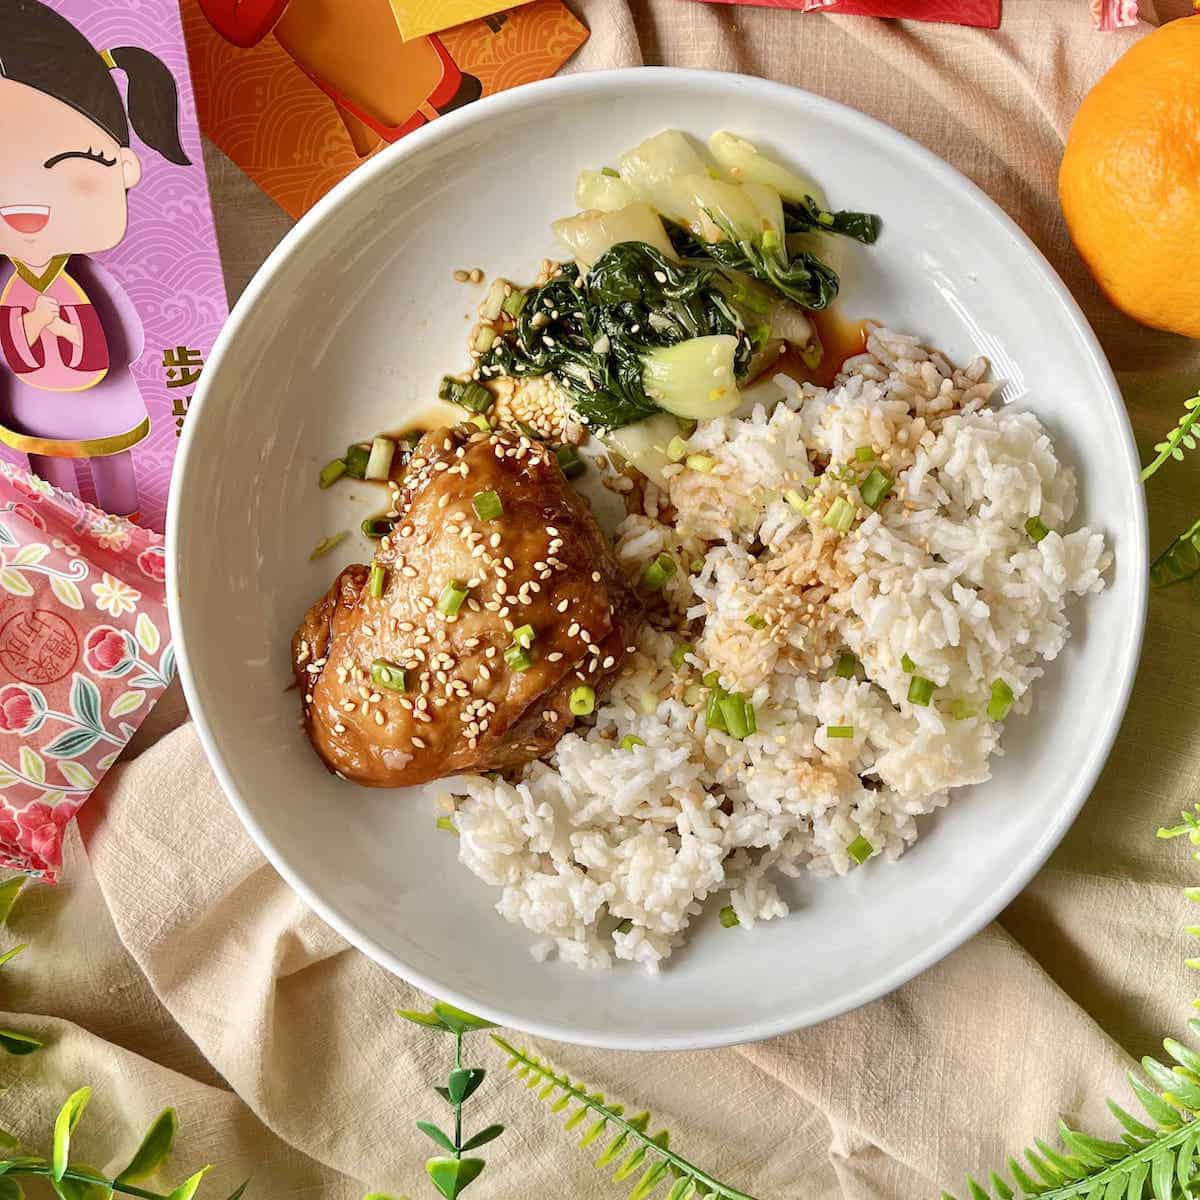 Soy Sauce braised chicken thigh with bok choy and rice.